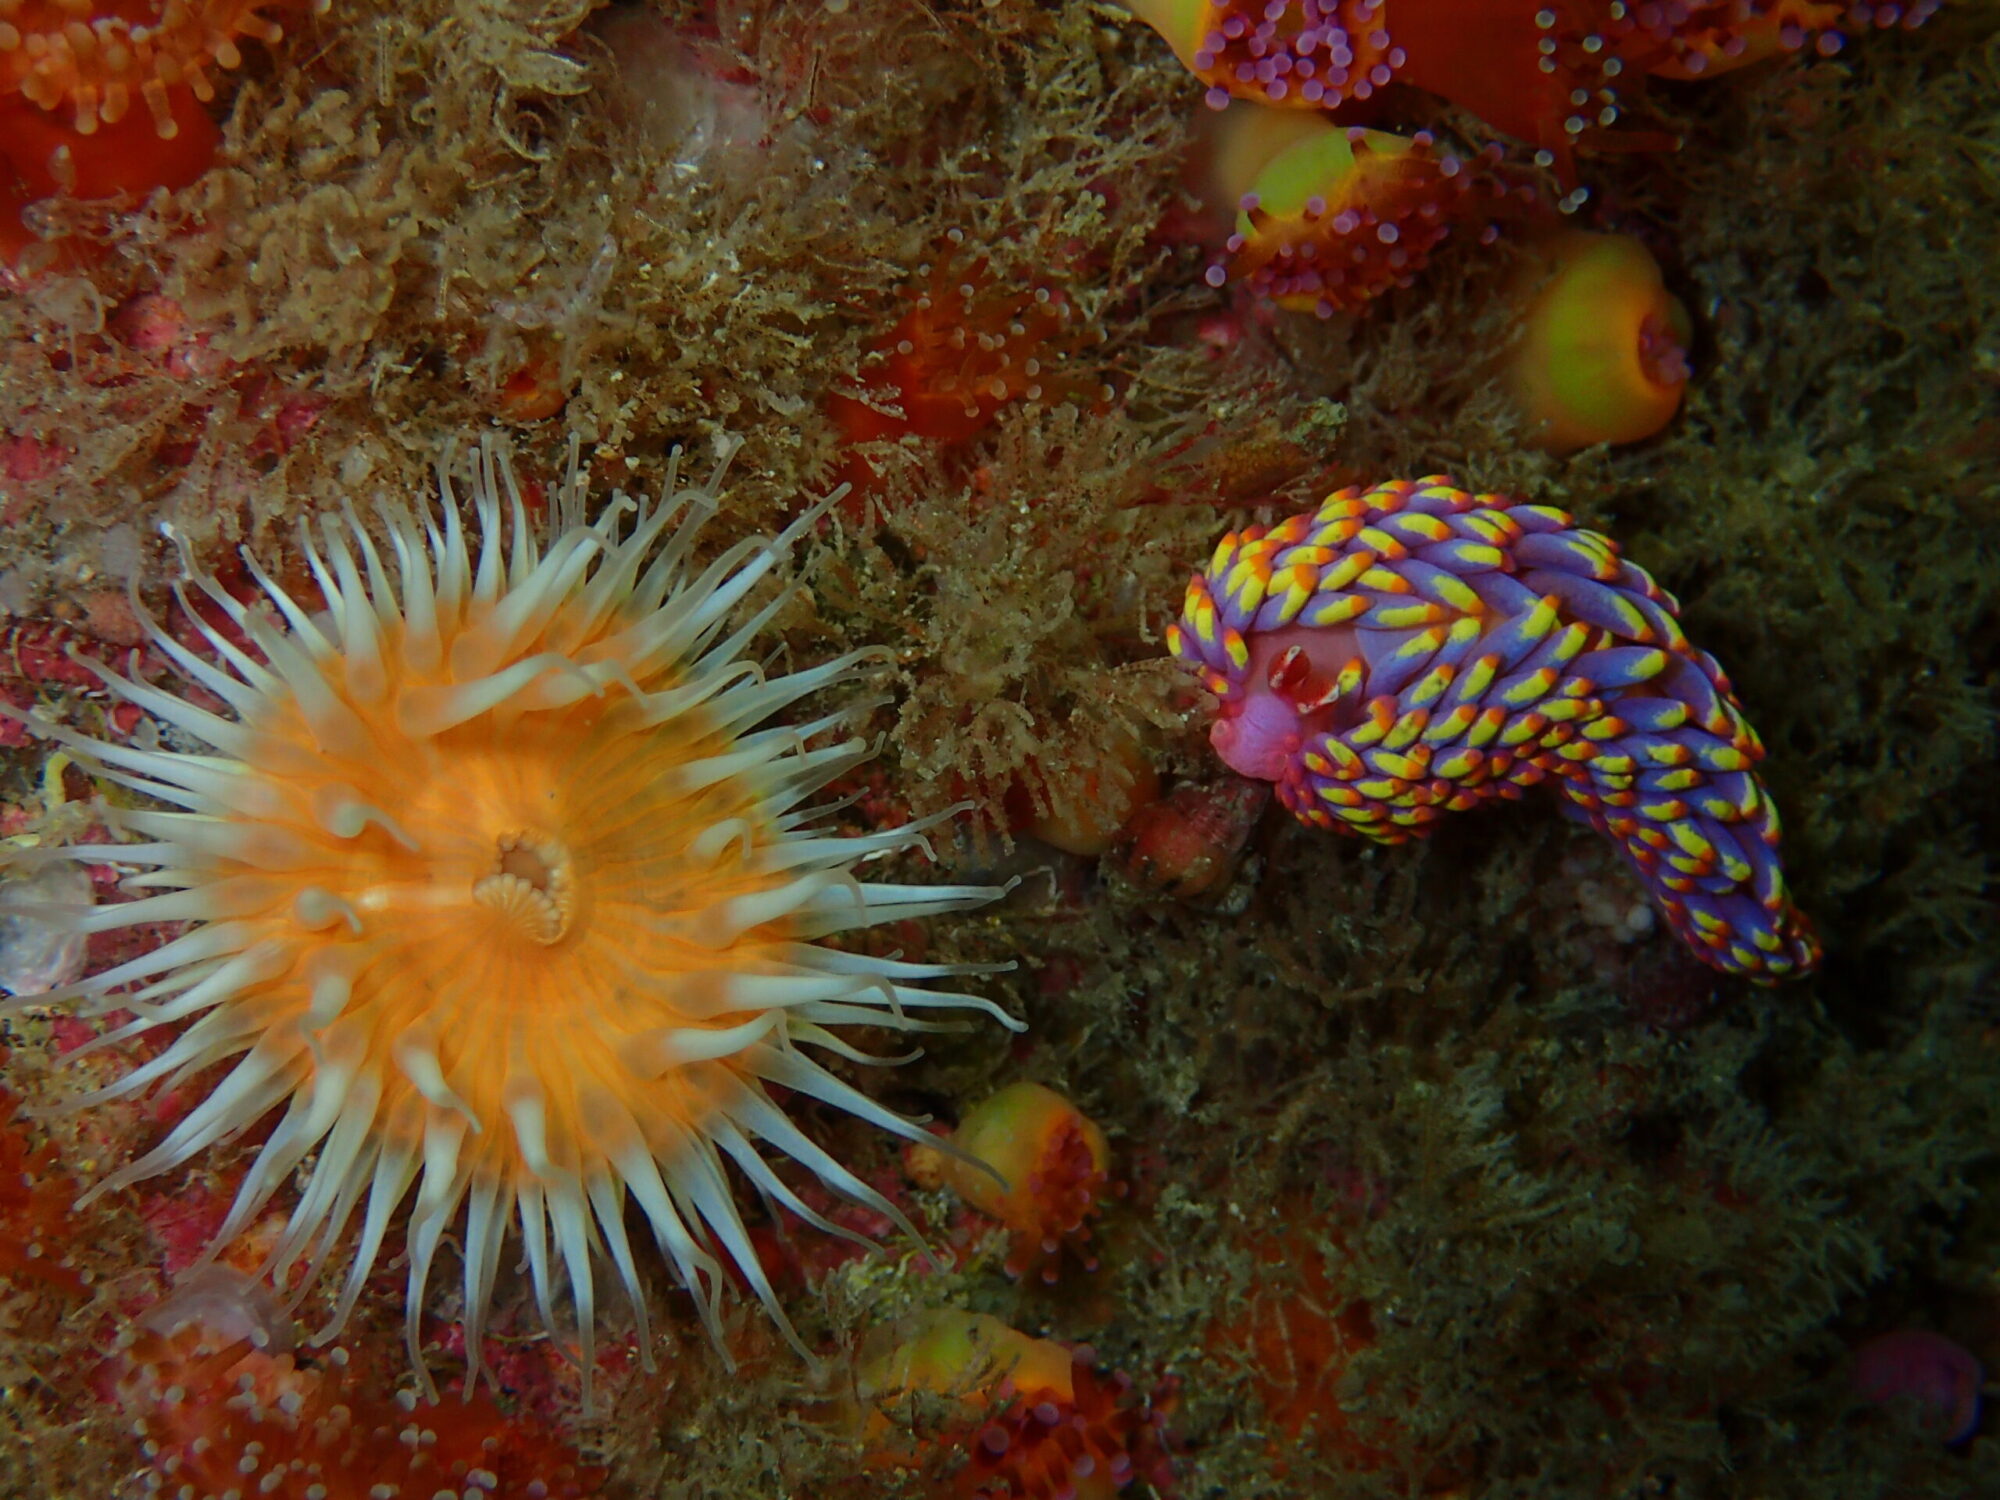 A rare and multicolored sea slug has been recorded in UK waters for the first time.